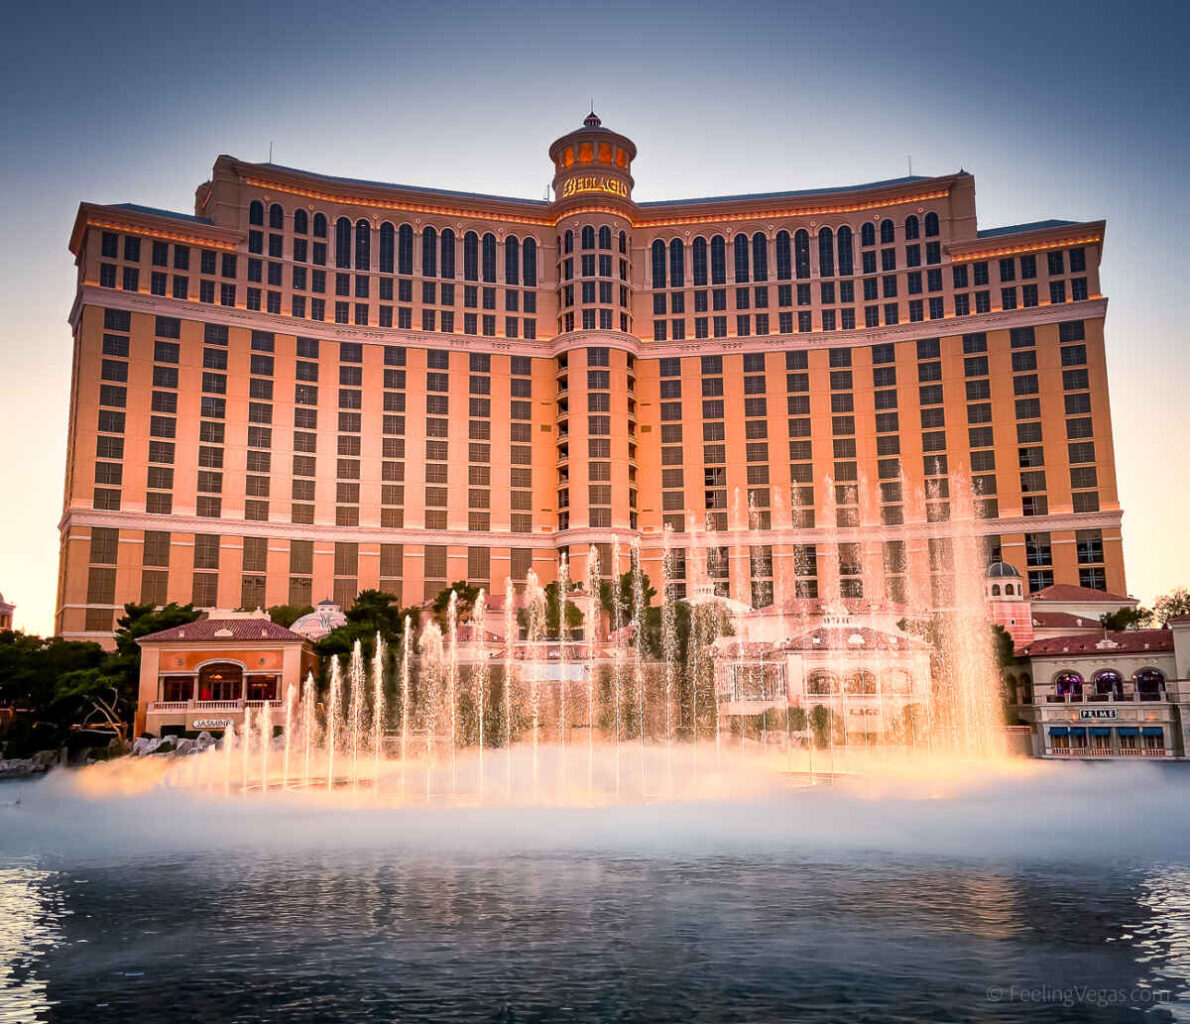 The lights below the water at Bellagio Fountains add to the iconic display at night.